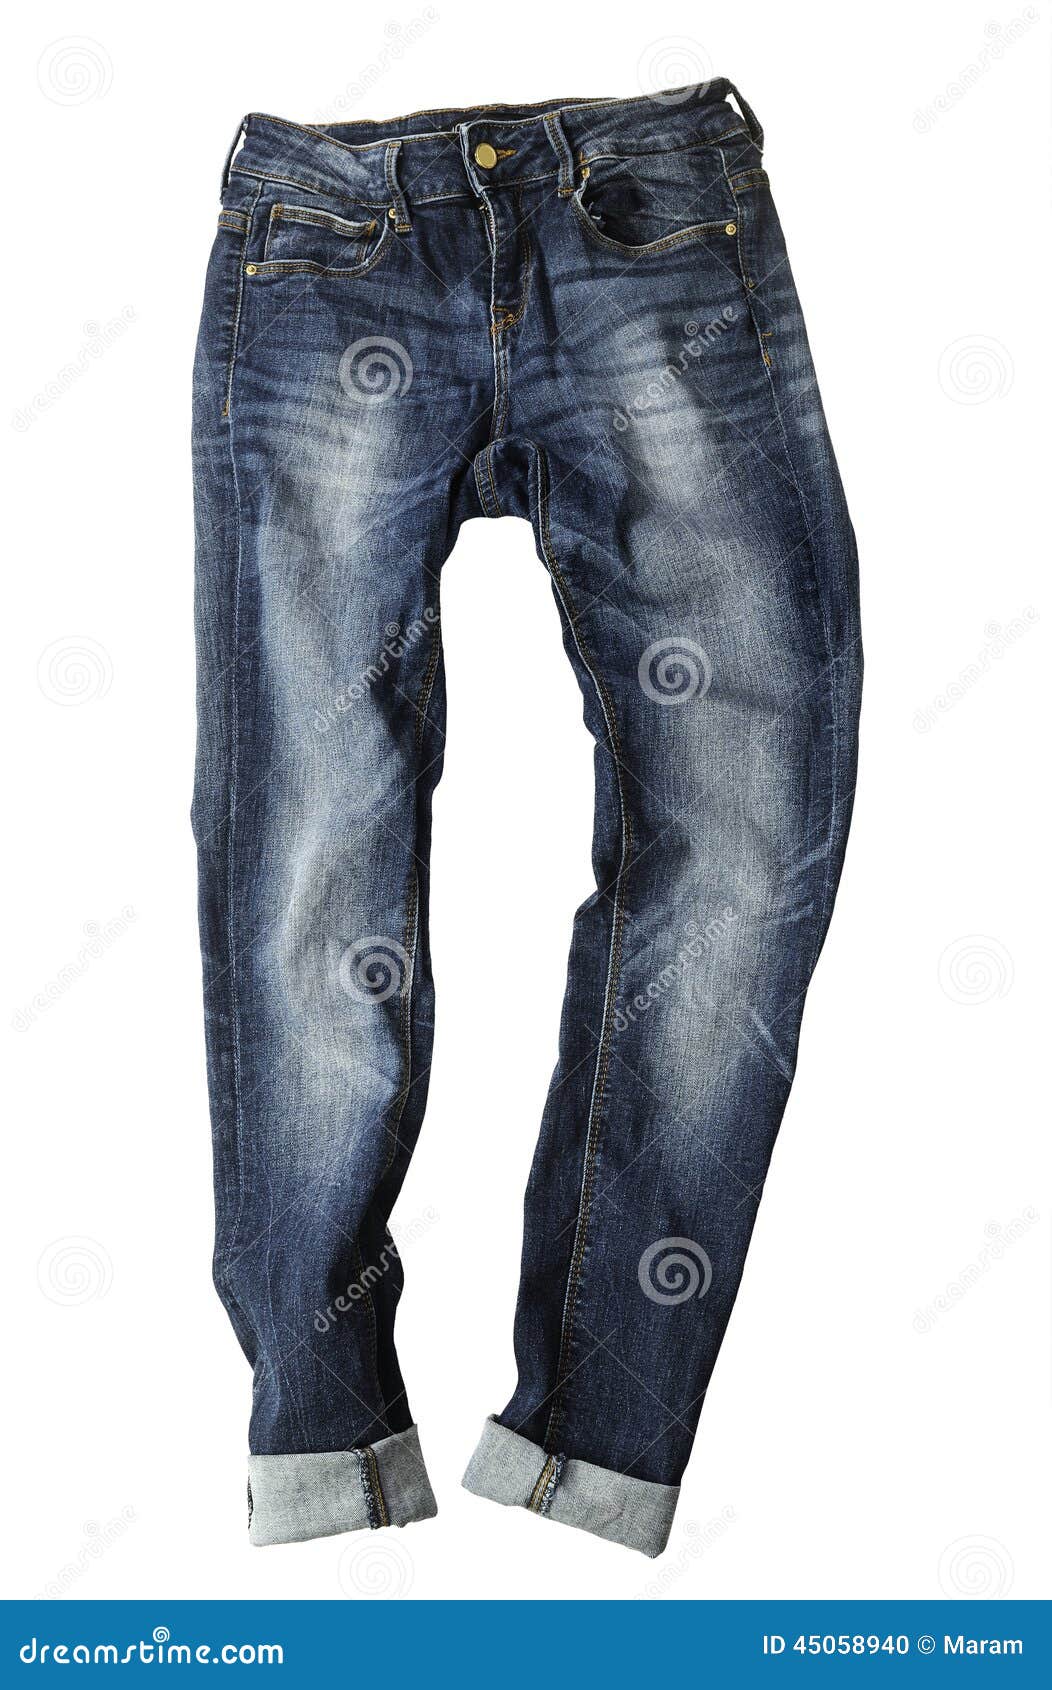 Blue Jeans Isolated stock photo. Image of pants, denim - 45058940